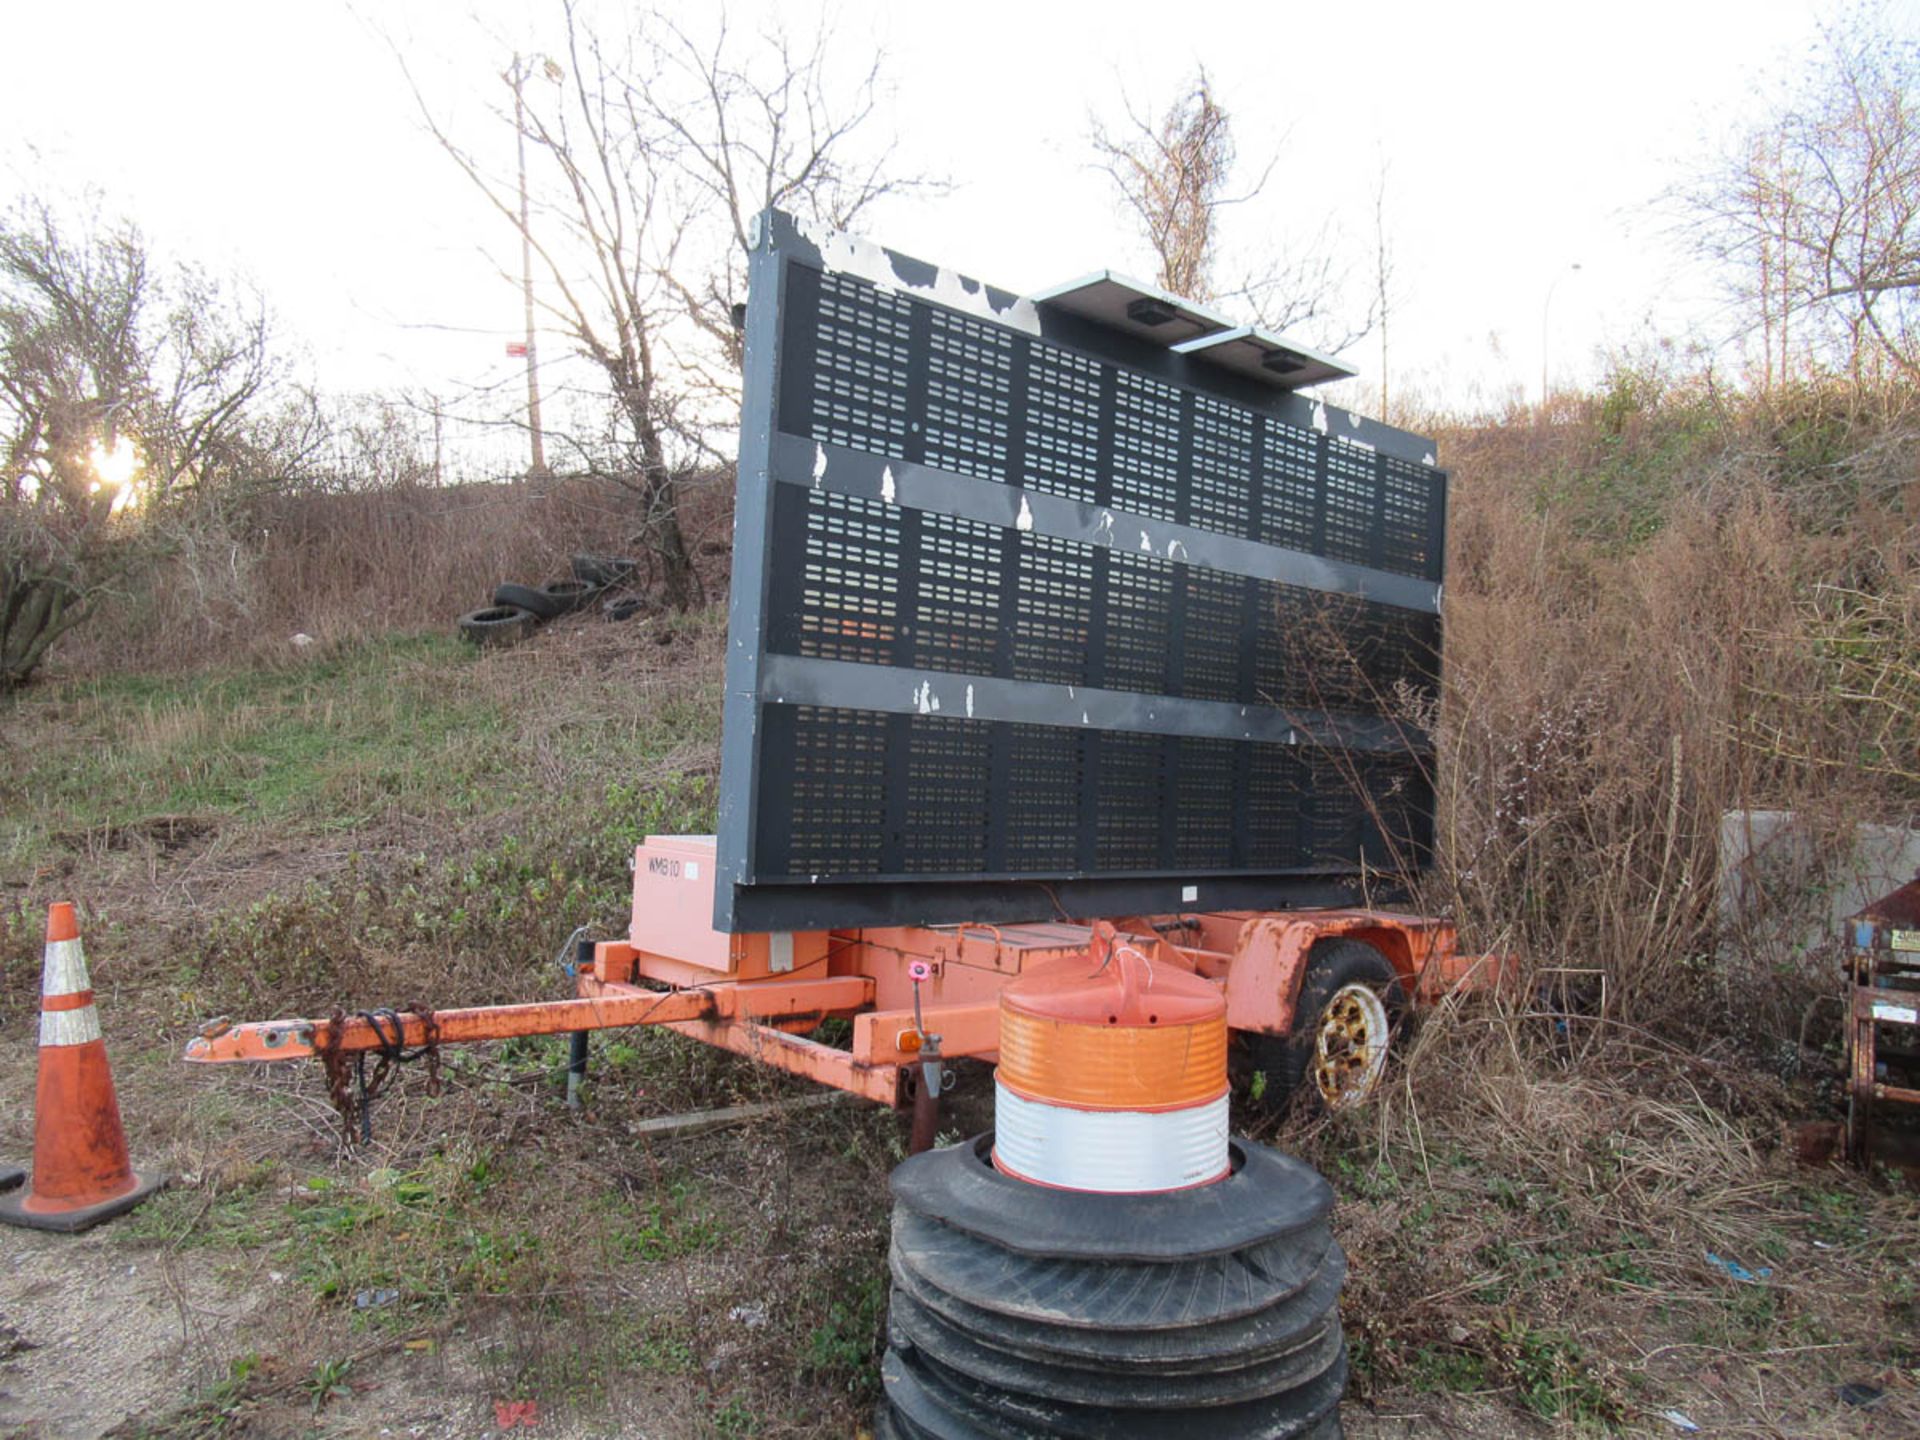 AMERICAN SIGNAL MDL. T331 MESSAGE BOARD [NOTE: SAMPLE PHOTO] [LOCATED @ WORK SITE]